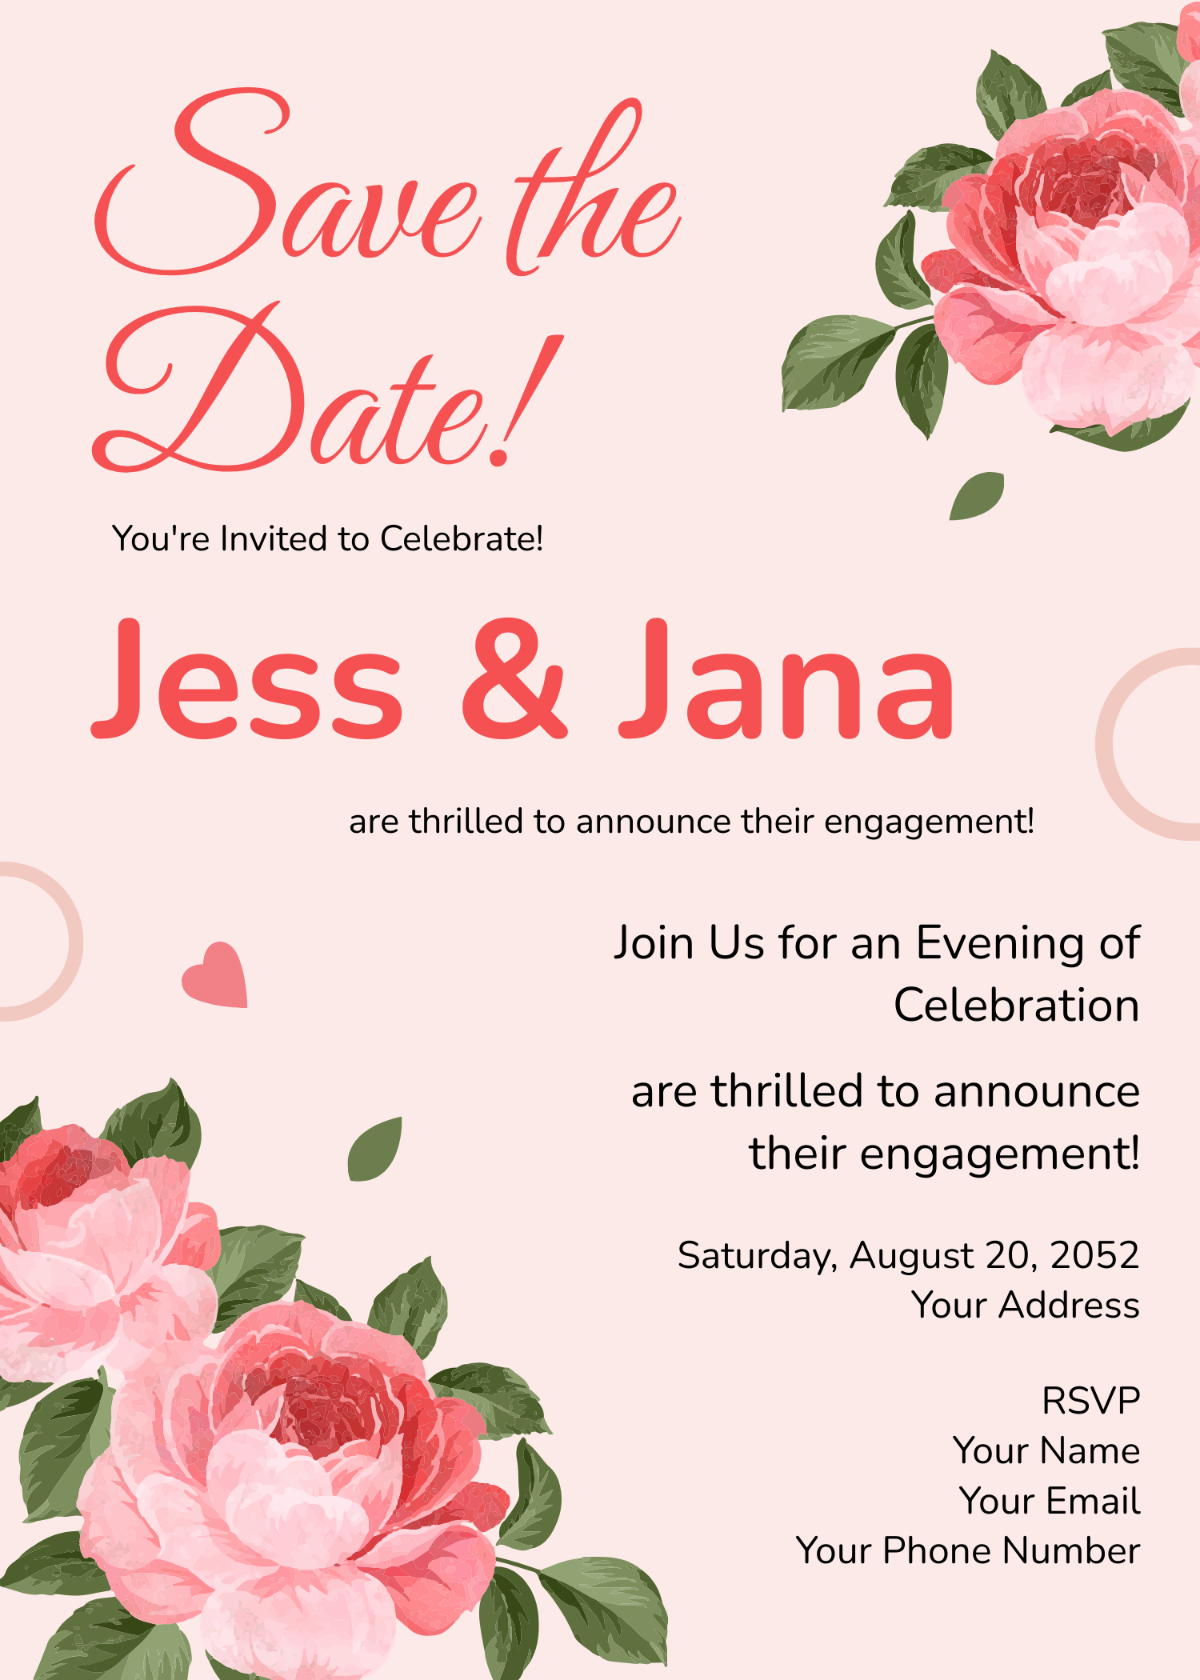 Save the Date Engagement Party Invitation